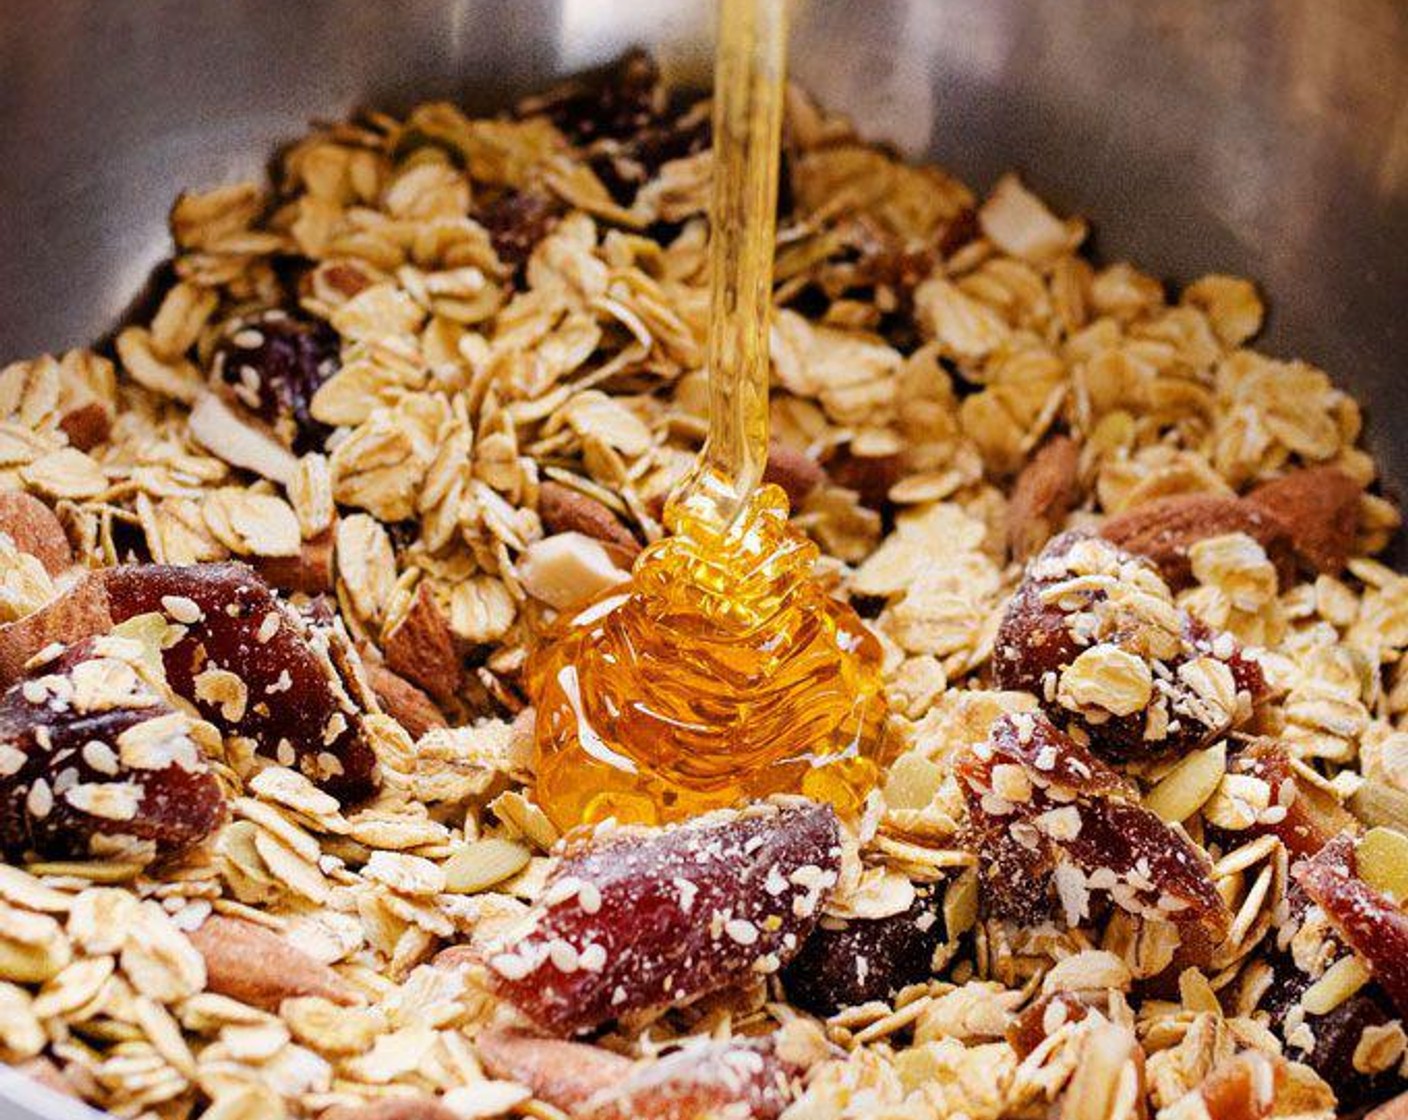 step 2 Combine Old Fashioned Rolled Oats (3 cups), Pepitas (3 Tbsp), Sesame Seeds (3 Tbsp), Medjool Dates (1 cup), Honey (1/2 cup), Almonds (1/2 cup) and Sea Salt (1/4 tsp) in a large bowl.